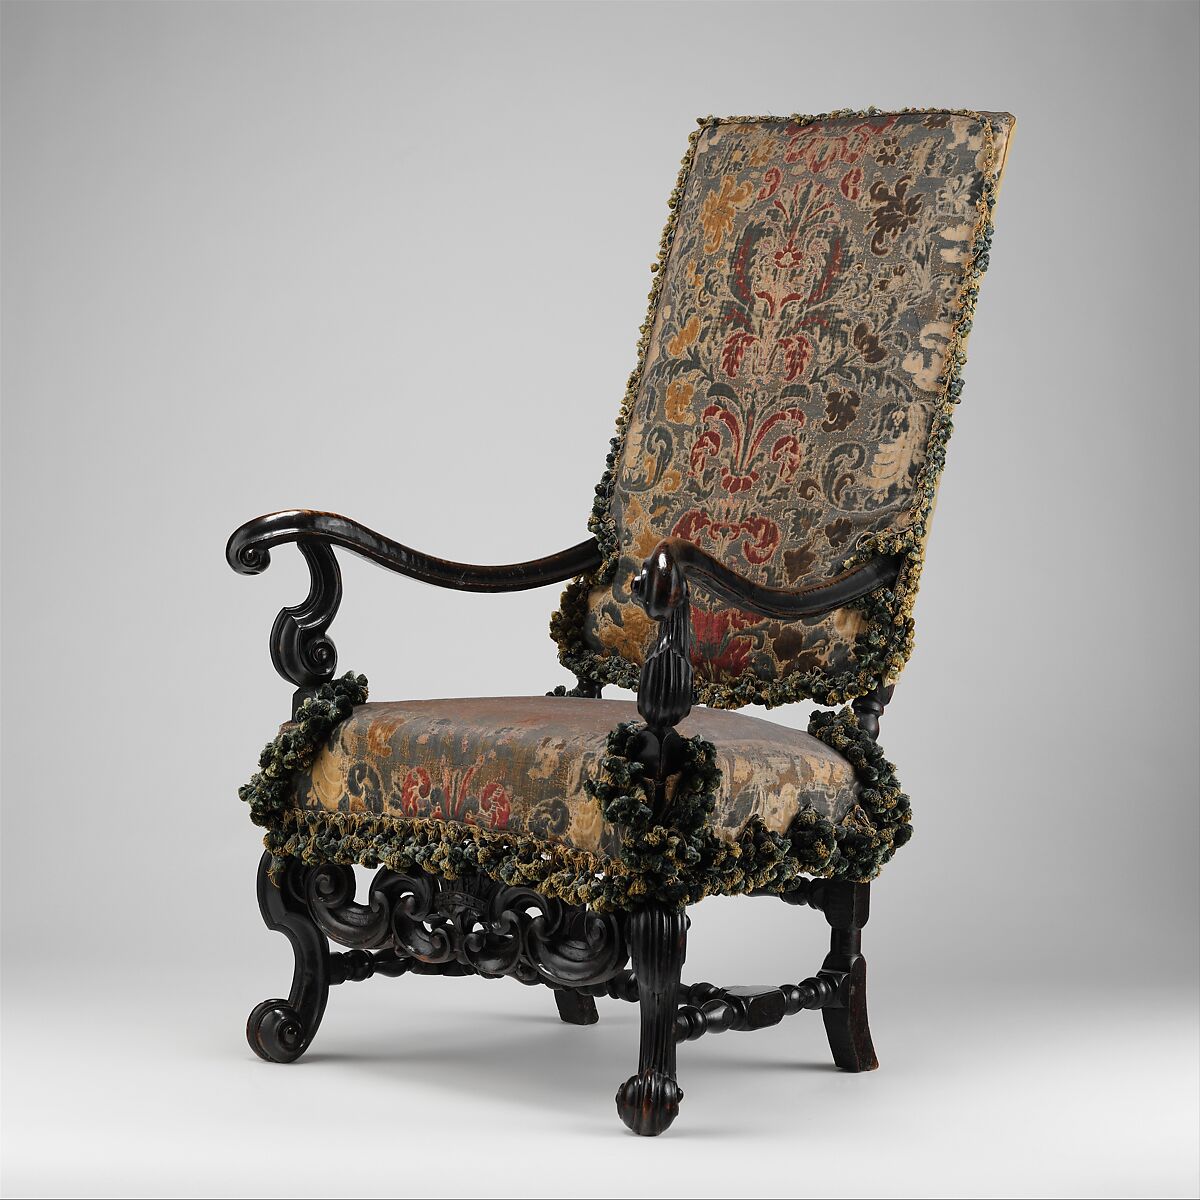 Upholstered armchair, originally from a set of eight, from Burley-on-the-Hill, Rutland (one of a pair), Attributed to Thomas Roberts (active 1685–1714), Ebonized beechwood, Genoese cut-velvet covers (original to the chair), British 